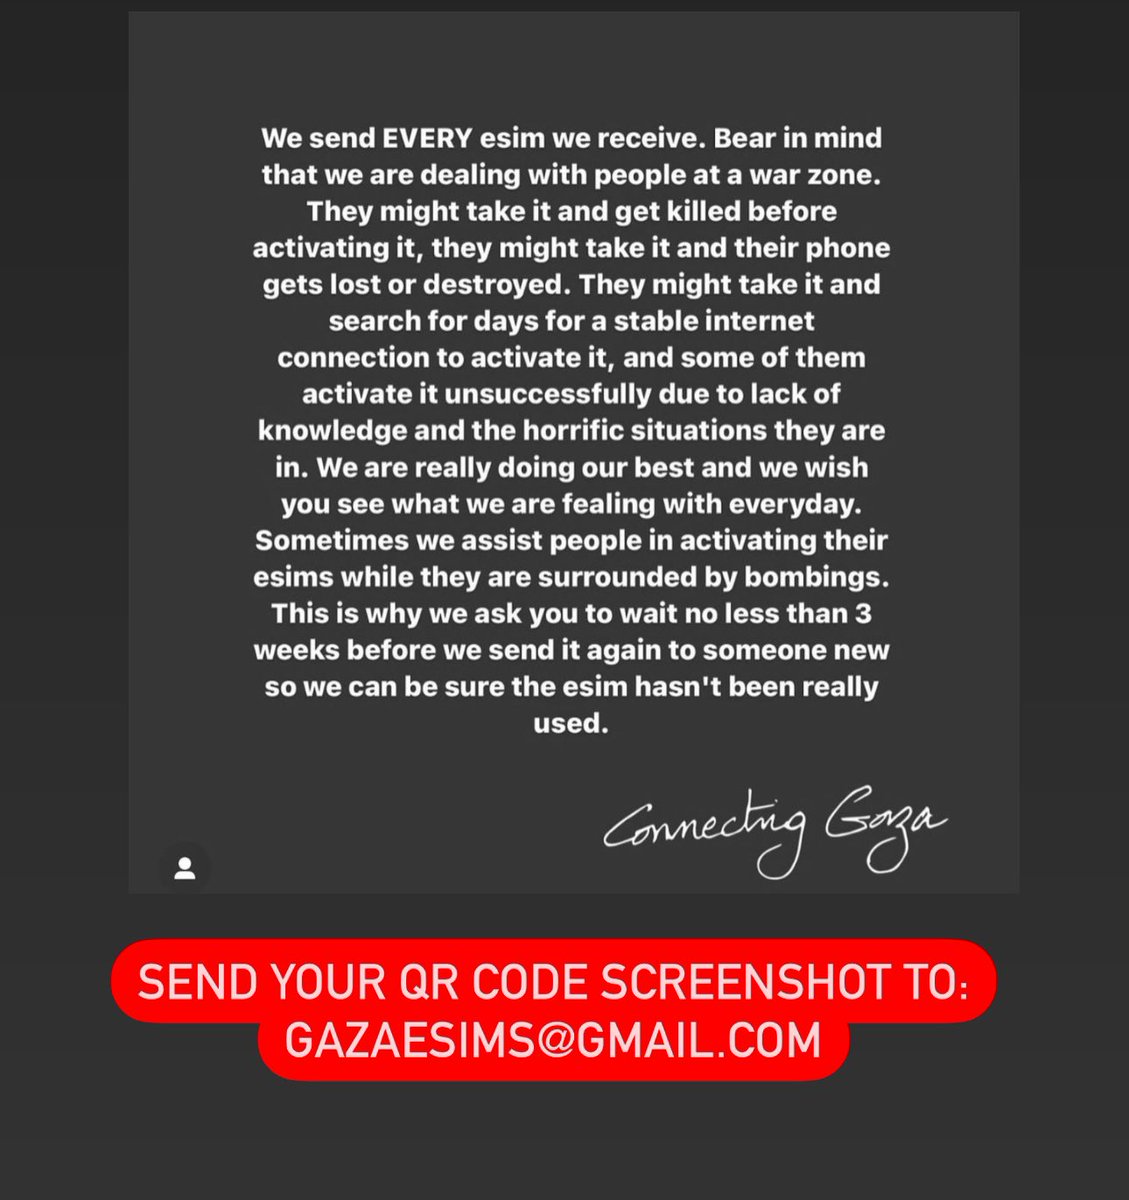 ANOTHER TOTAL TELECOMMUNICATION BLACKOUT IN GAZA!! DON'T LET THEM ISOLATE GAZA STRIP!! KEEP #connectingGaza